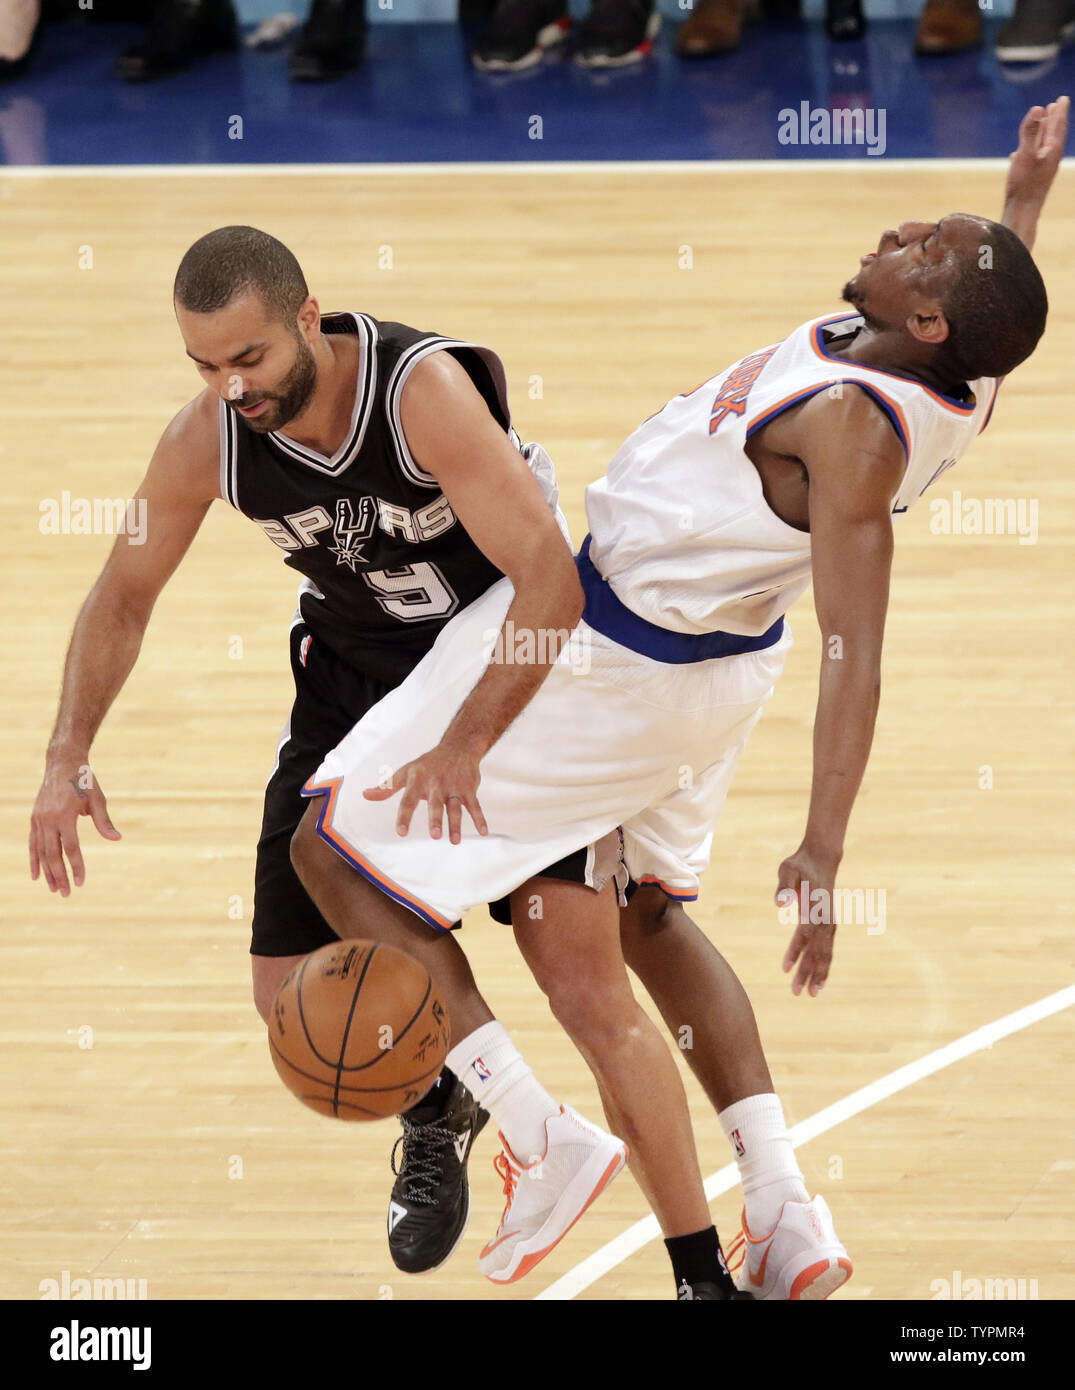 Game Between The New-yYork Knicks And The Antonio Spurs At Madison